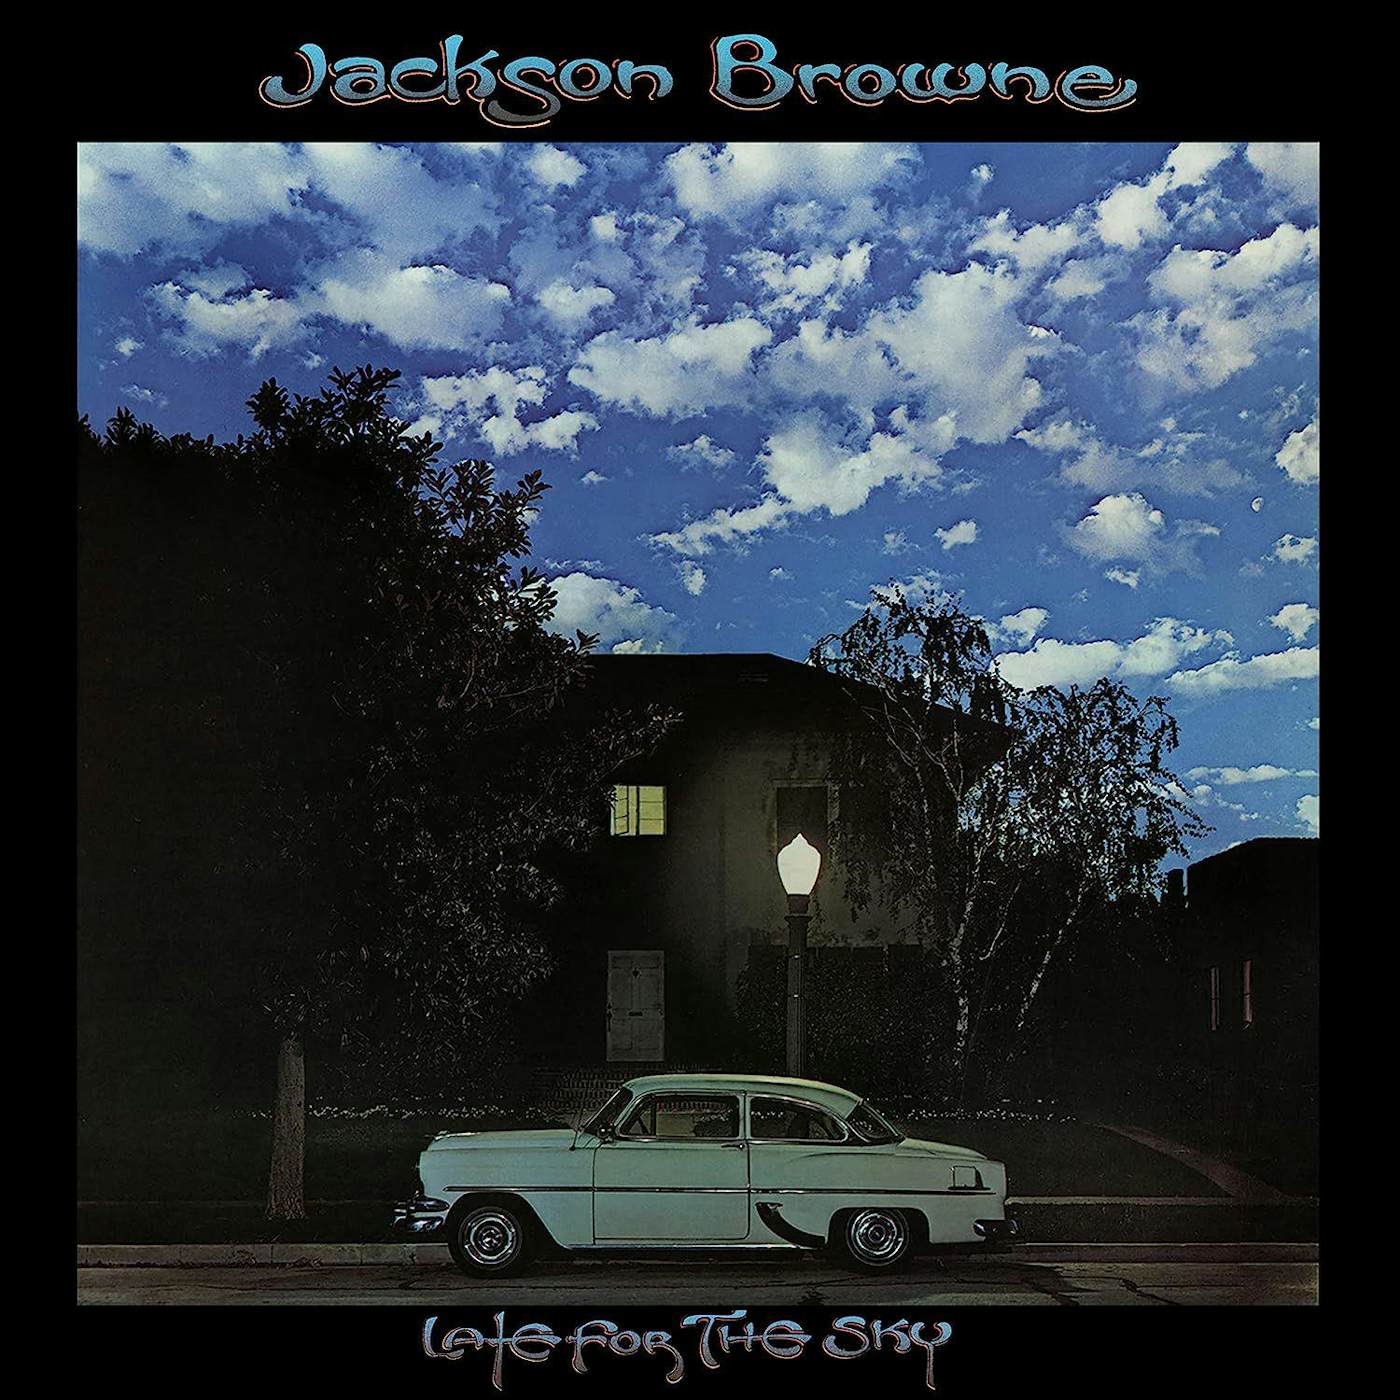 Jackson Browne Late For The Sky Vinyl Record